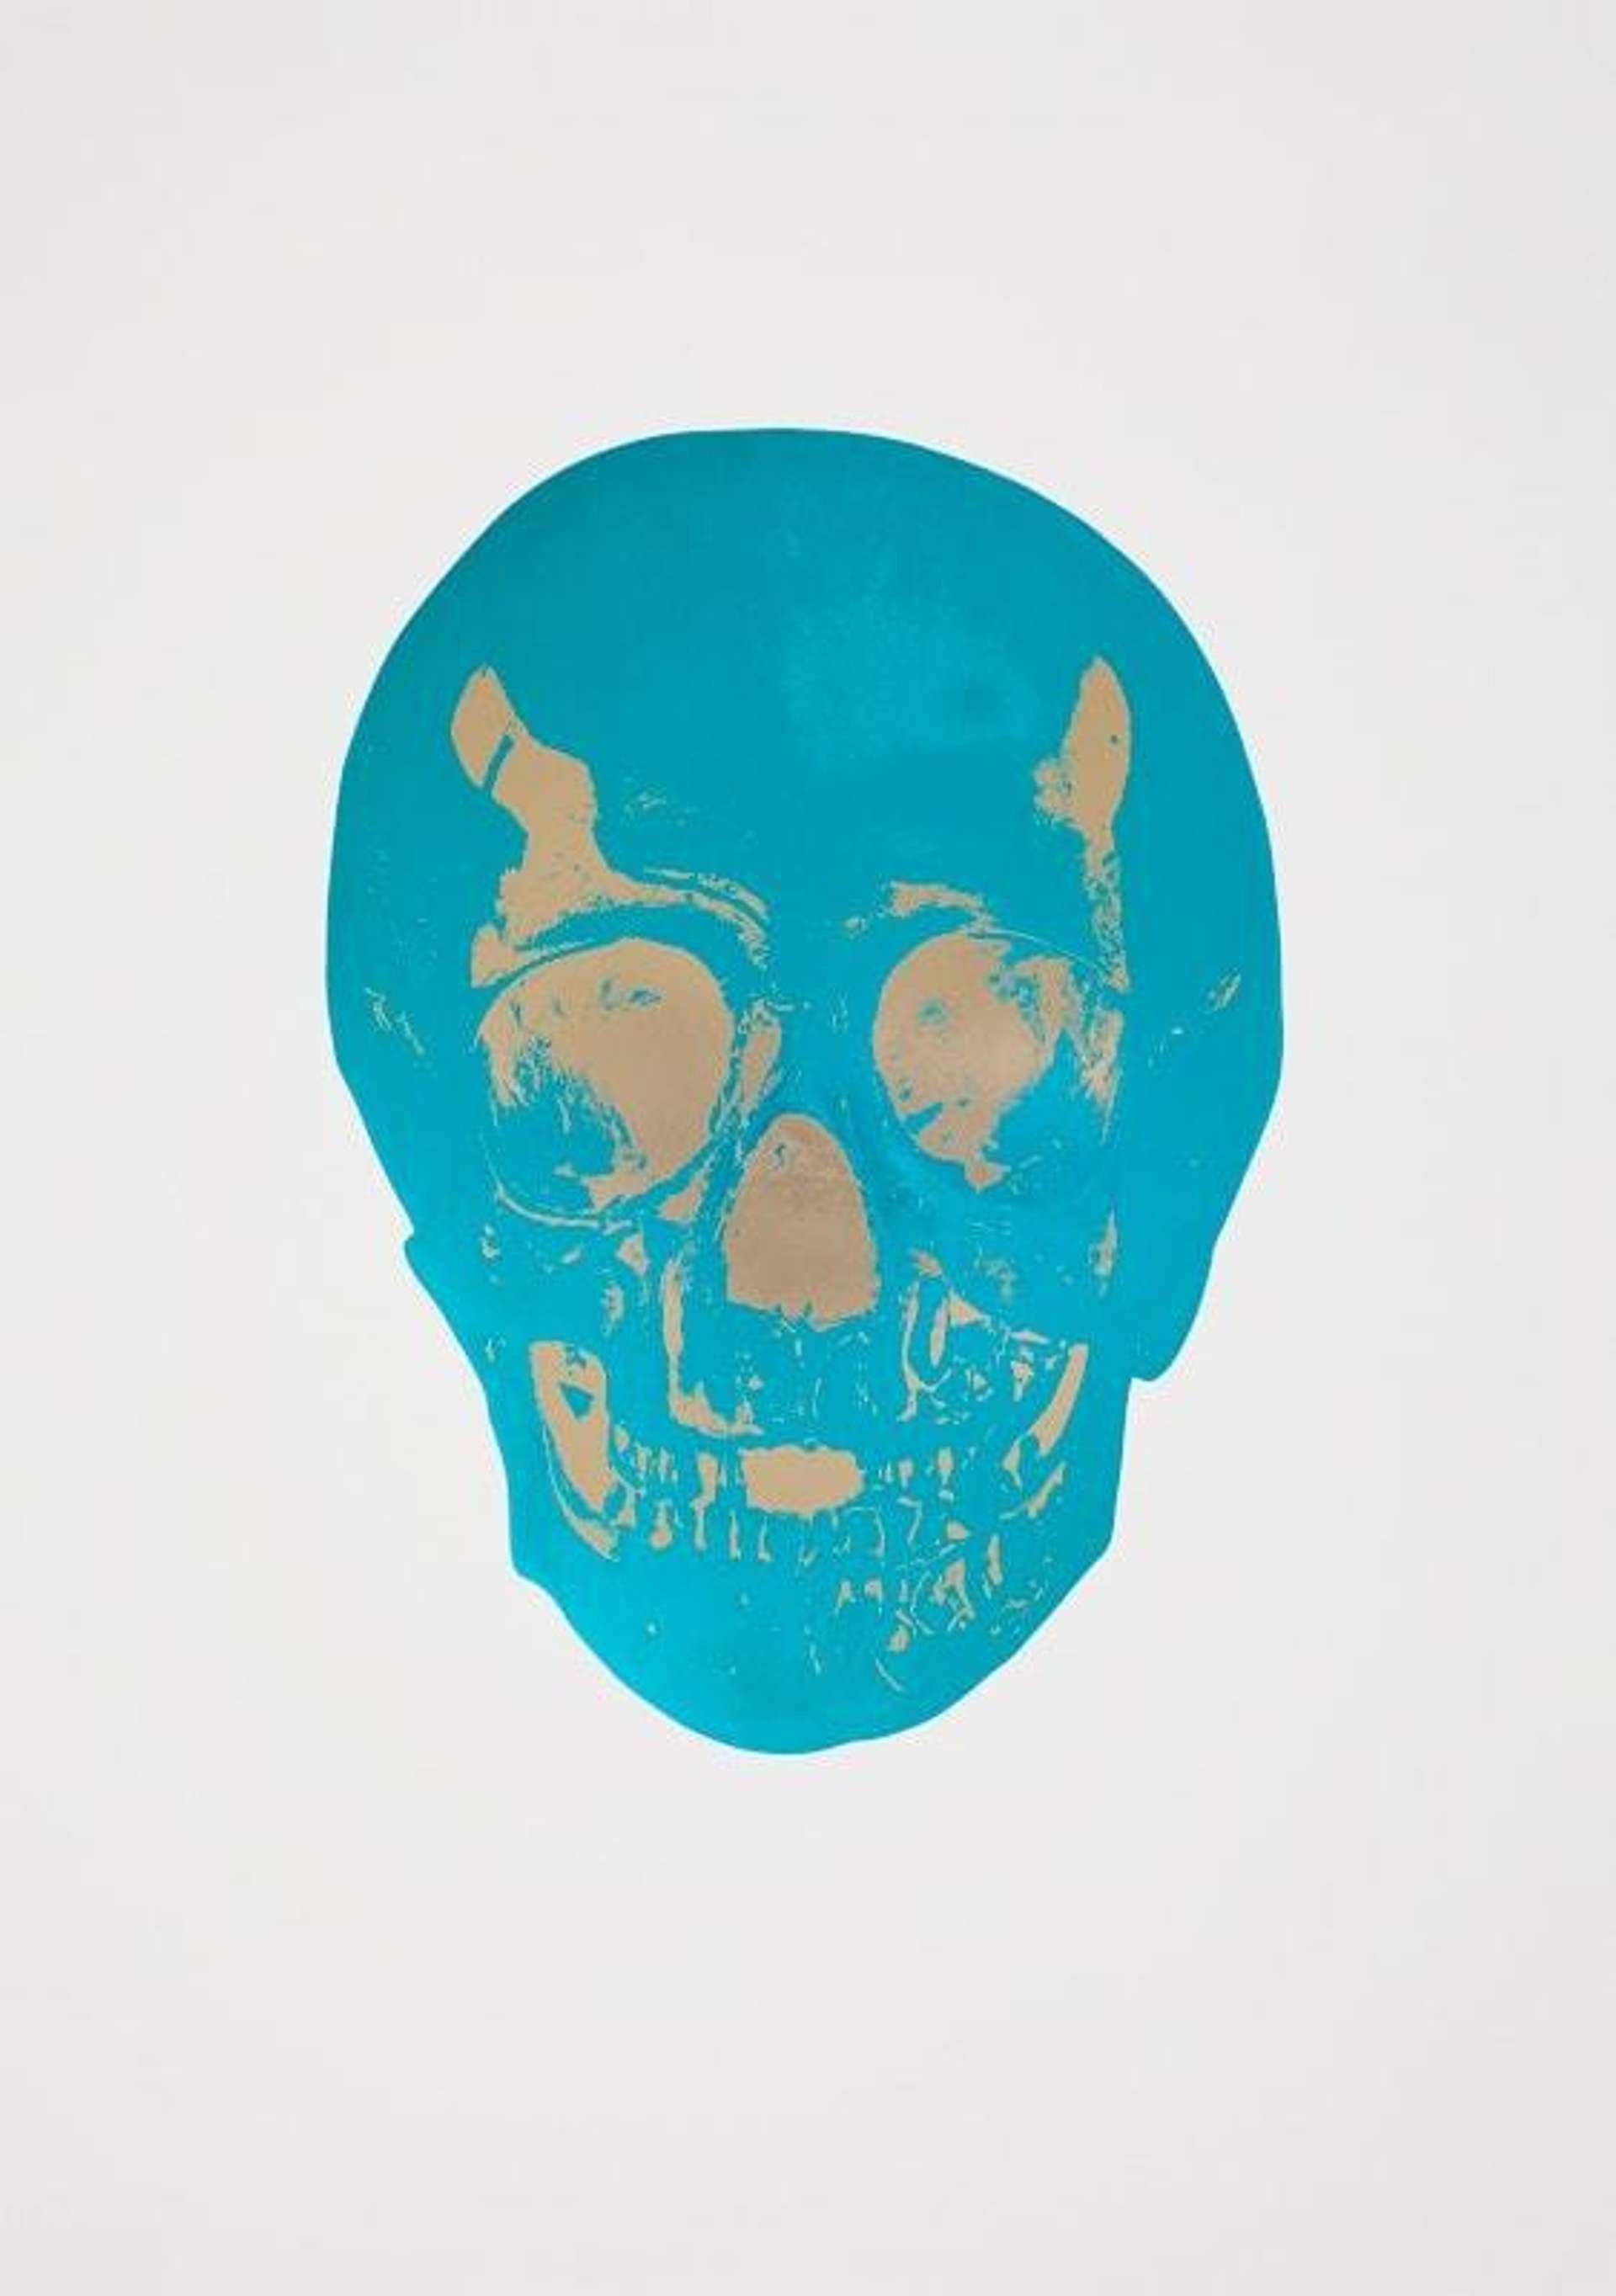 Damien Hirst: The Dead (turquoise, cool gold) - Signed Print